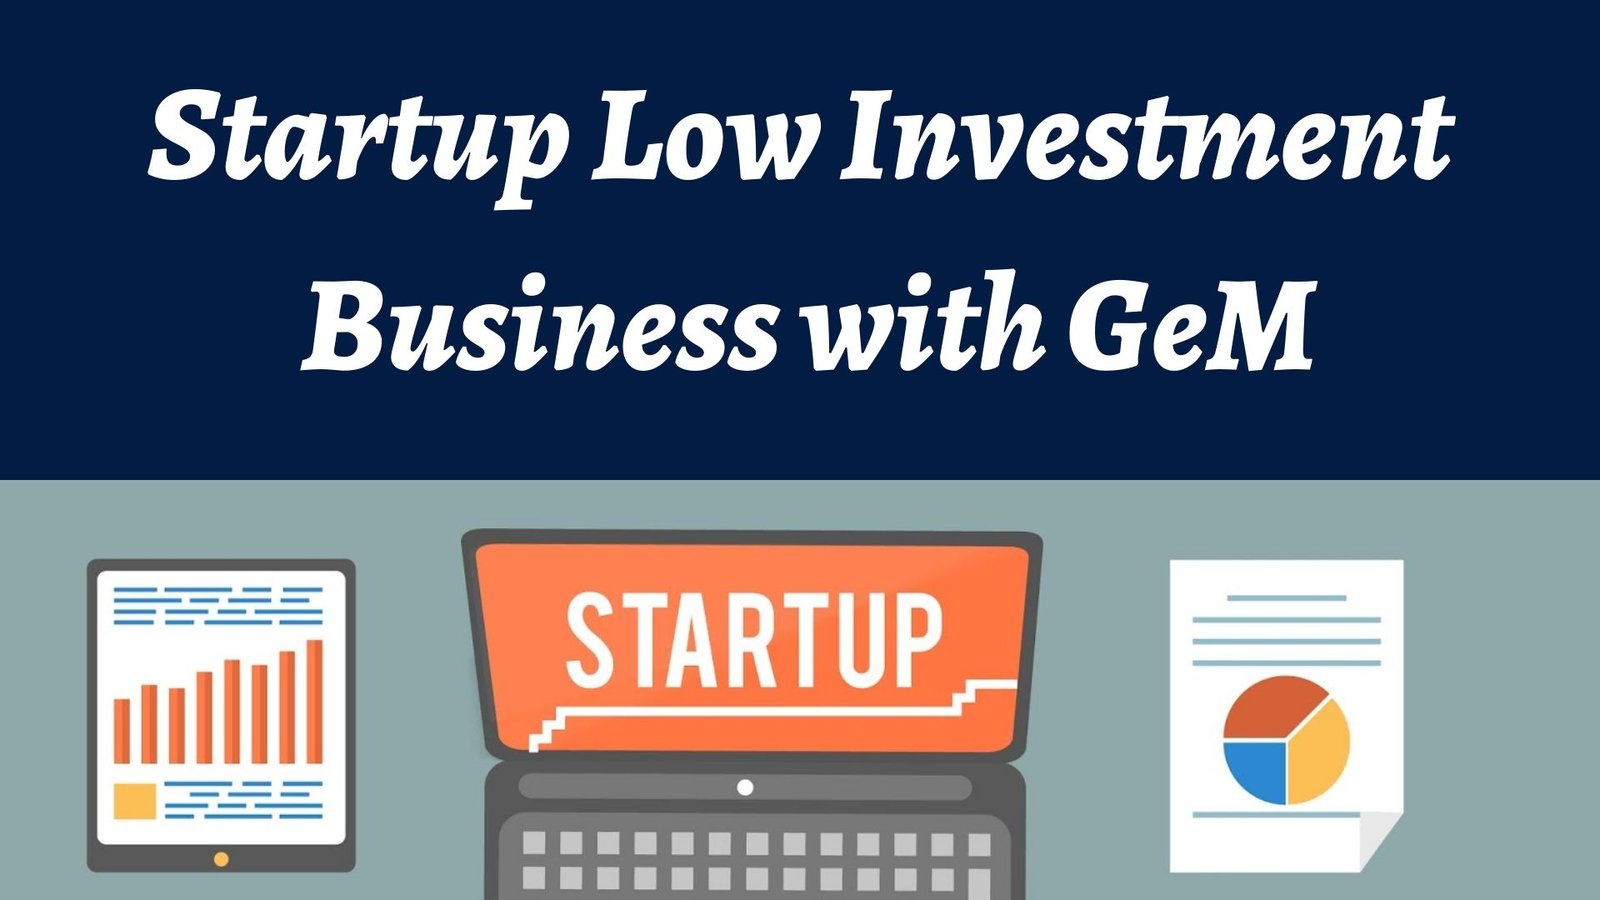 Start-up low investment business with GeM